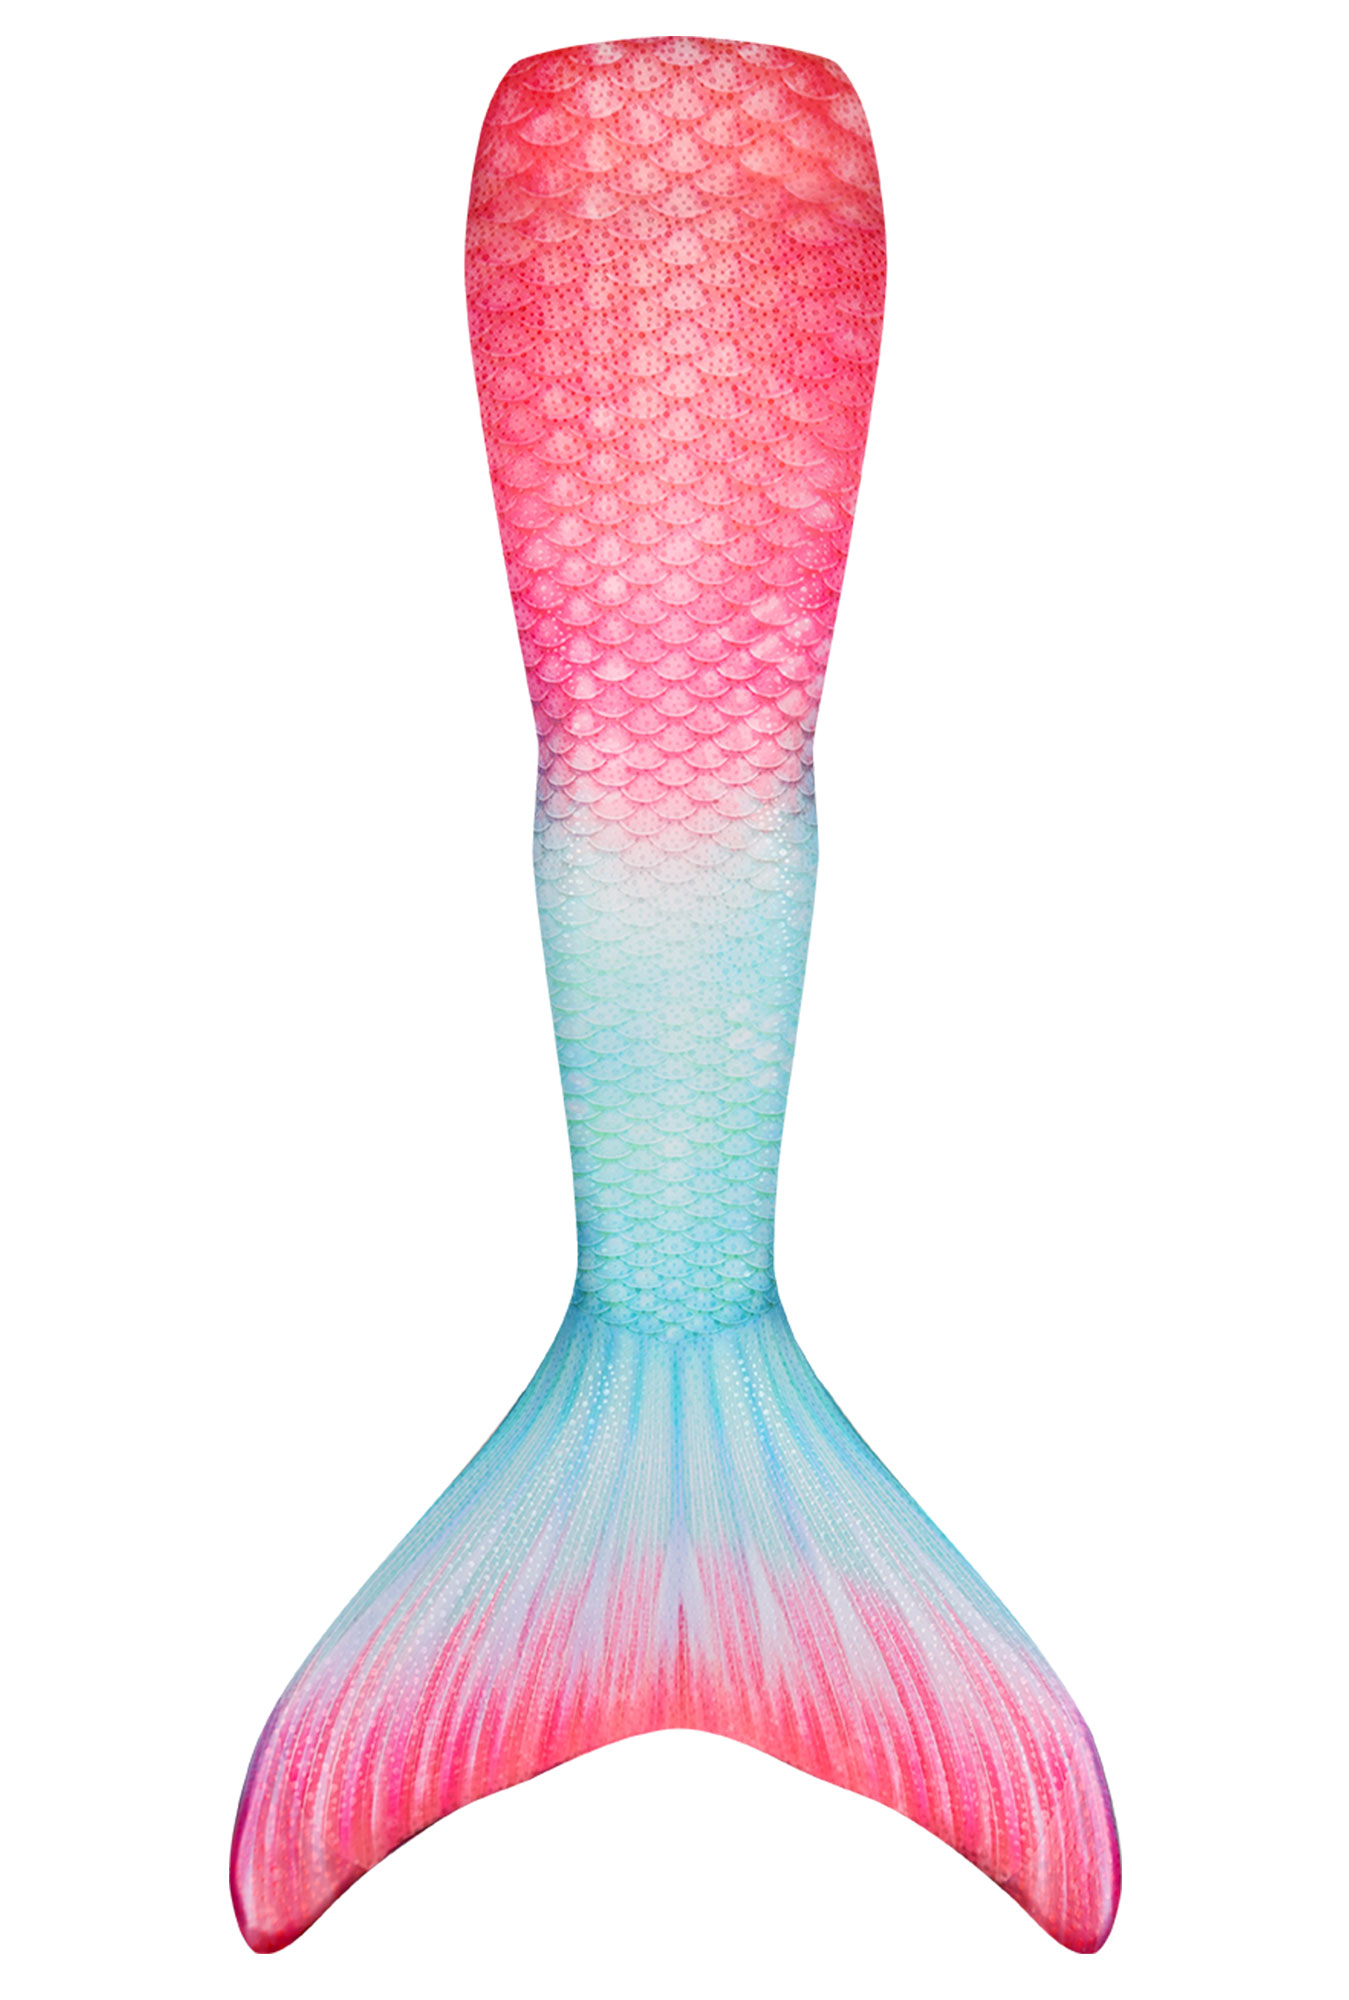 The Best Kids Mermaid Tails for Swimming - Fin Fun "Limited Edition